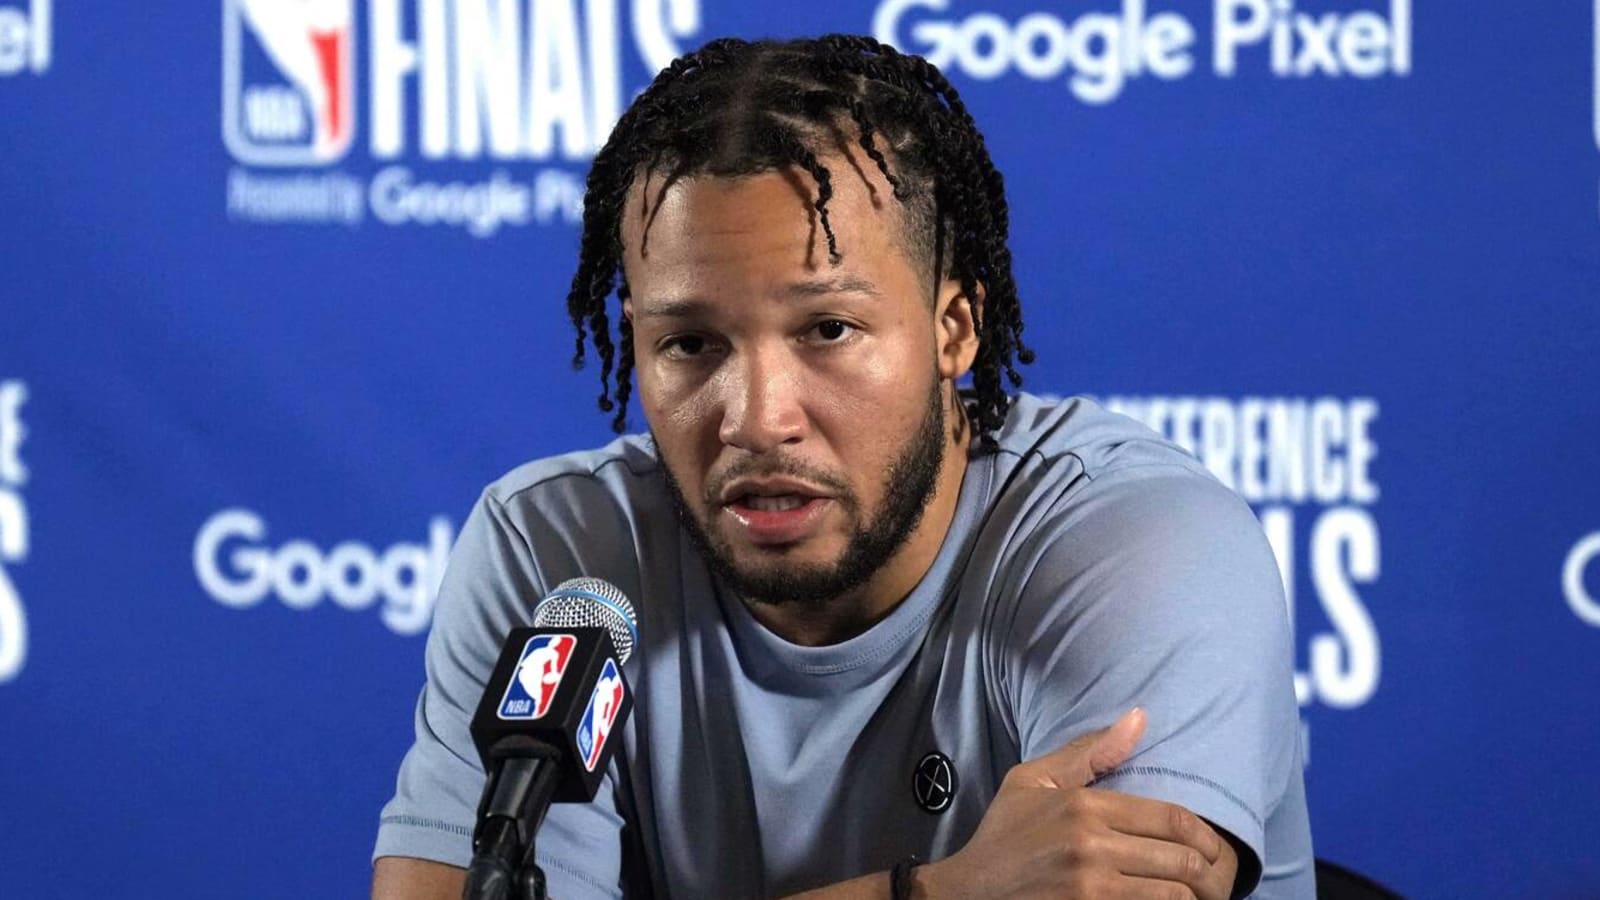 Jalen Brunson planned to play in Dallas 'for a long time'